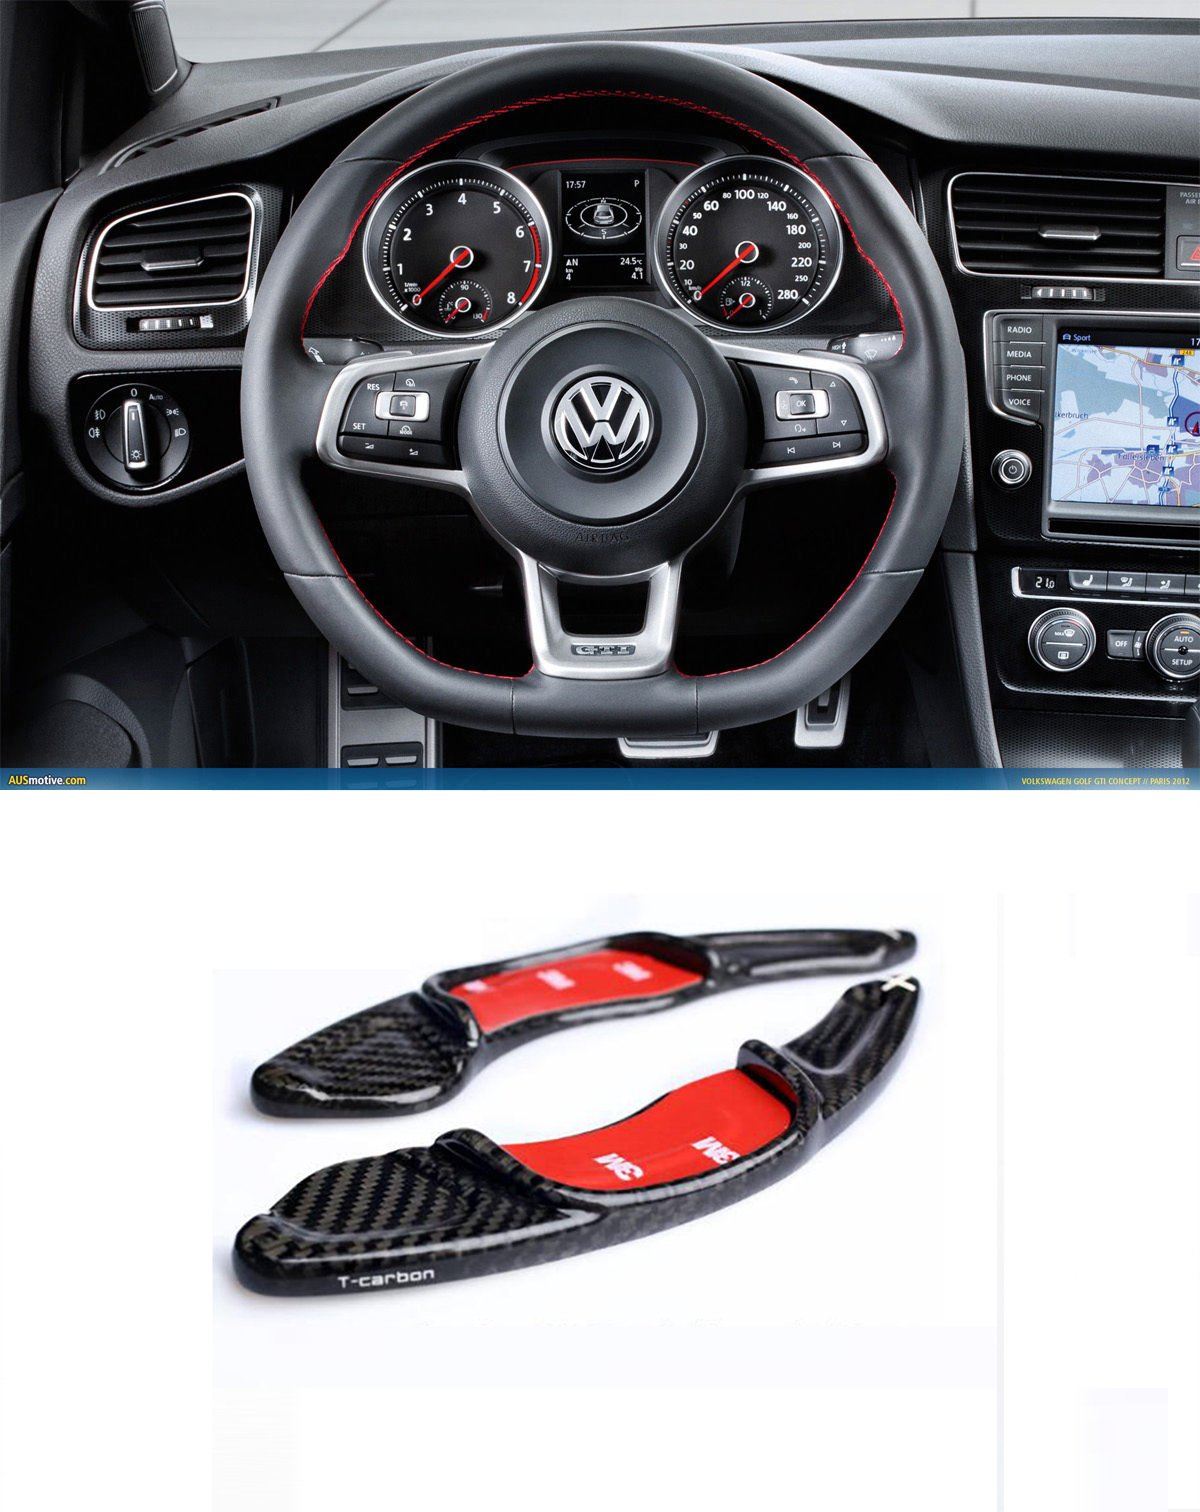 Pinalloy Real Carbon Fiber Steering Paddle Shifter Extension for VW Golf MK7 Scirocco GTi R - Pinalloy Online Auto Accessories Lightweight Car Kit 